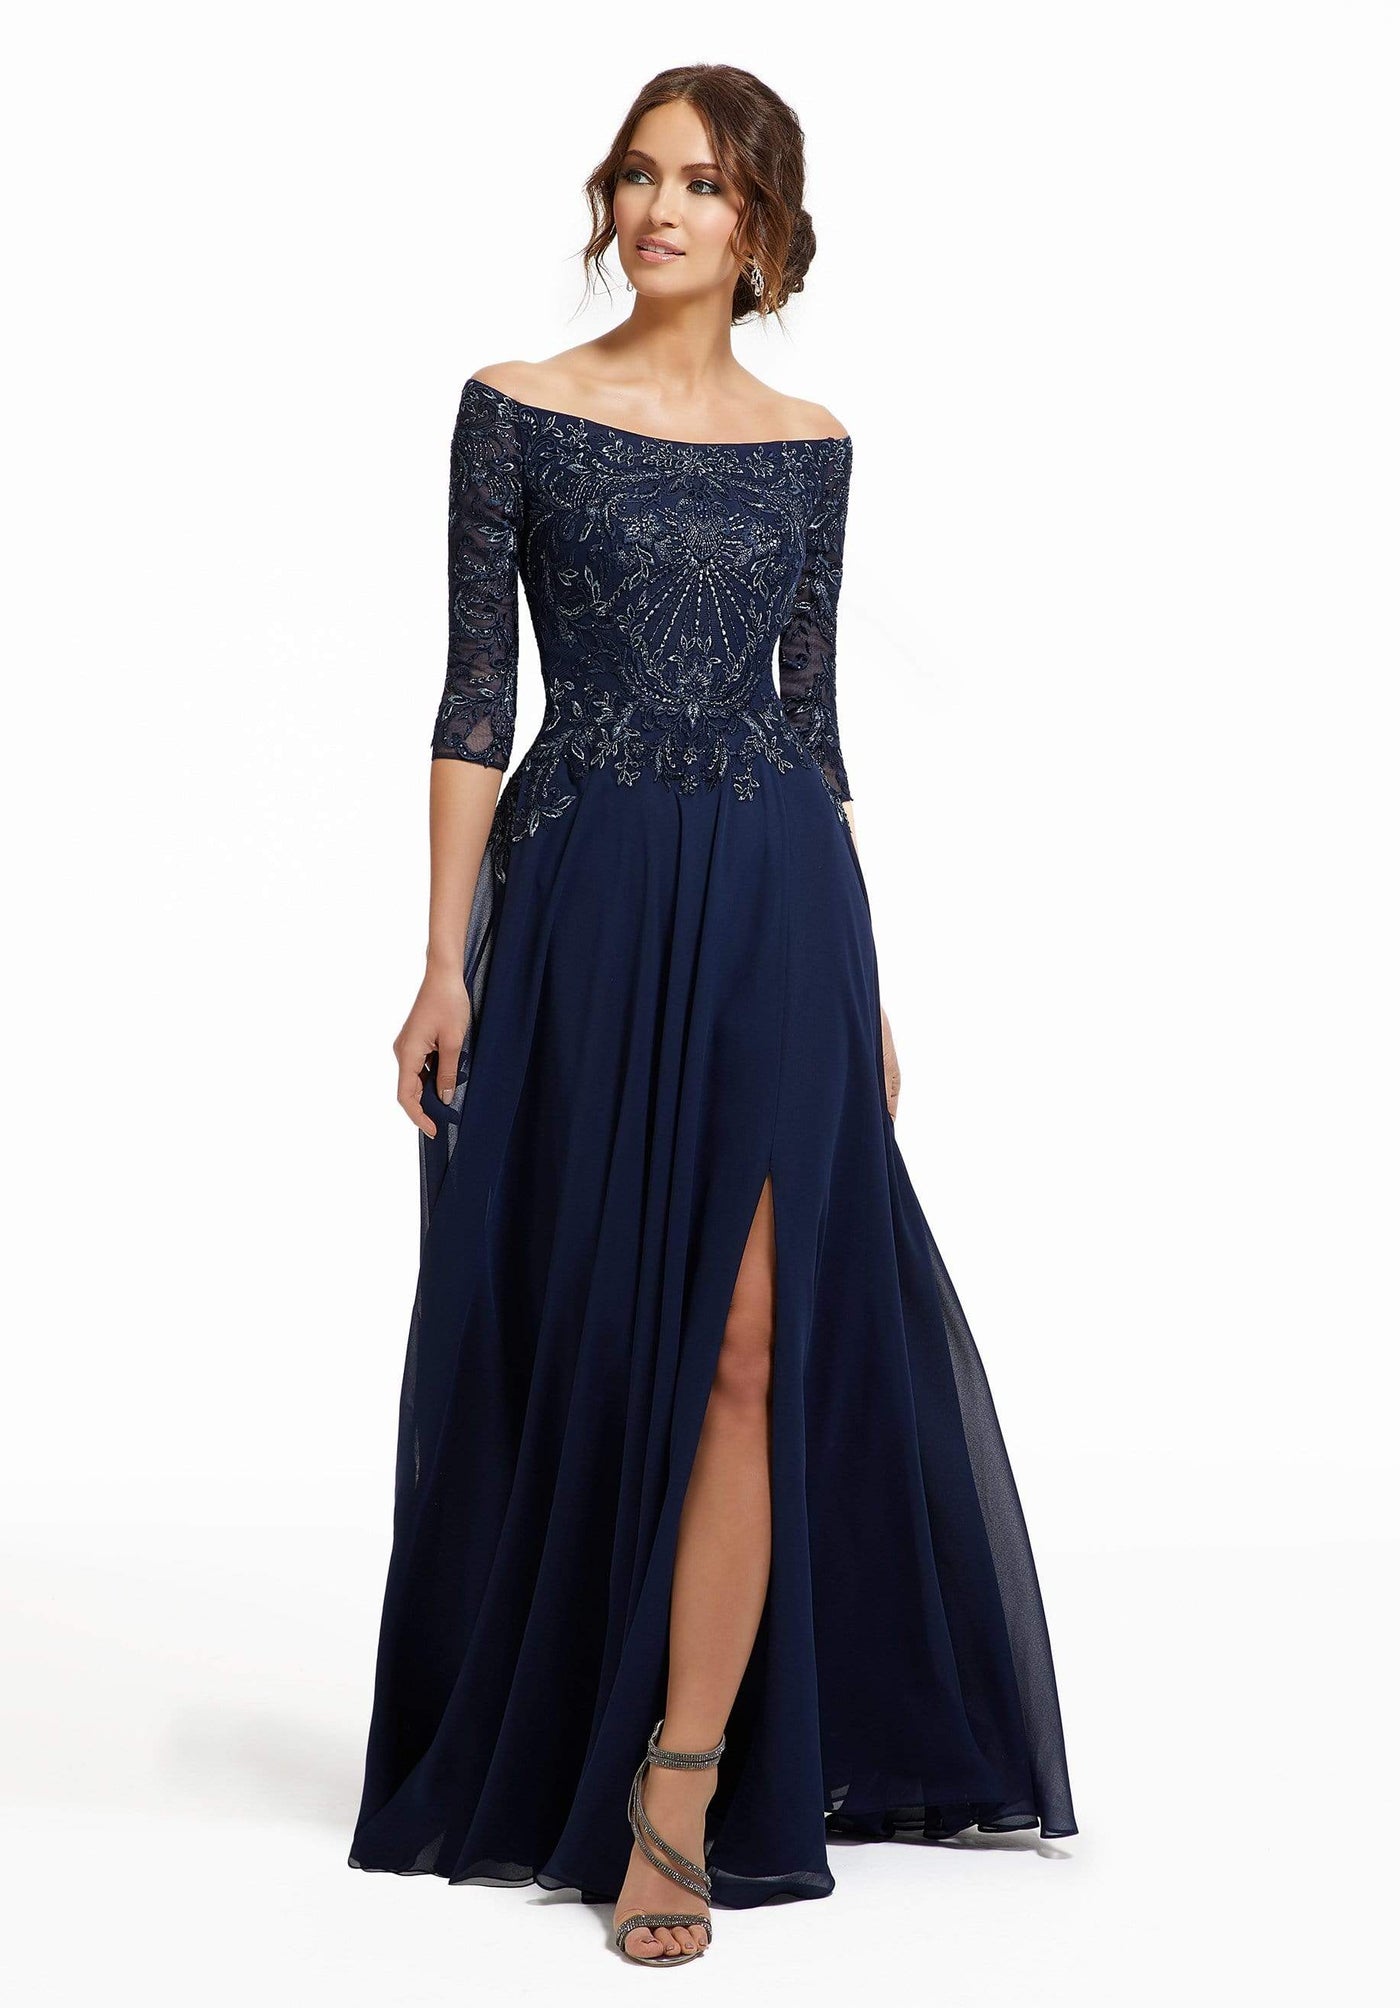 MGNY By Mori Lee - 72017 Beaded Embroidered Dress with Slit Mother of the Bride Dresses 0 / Navy